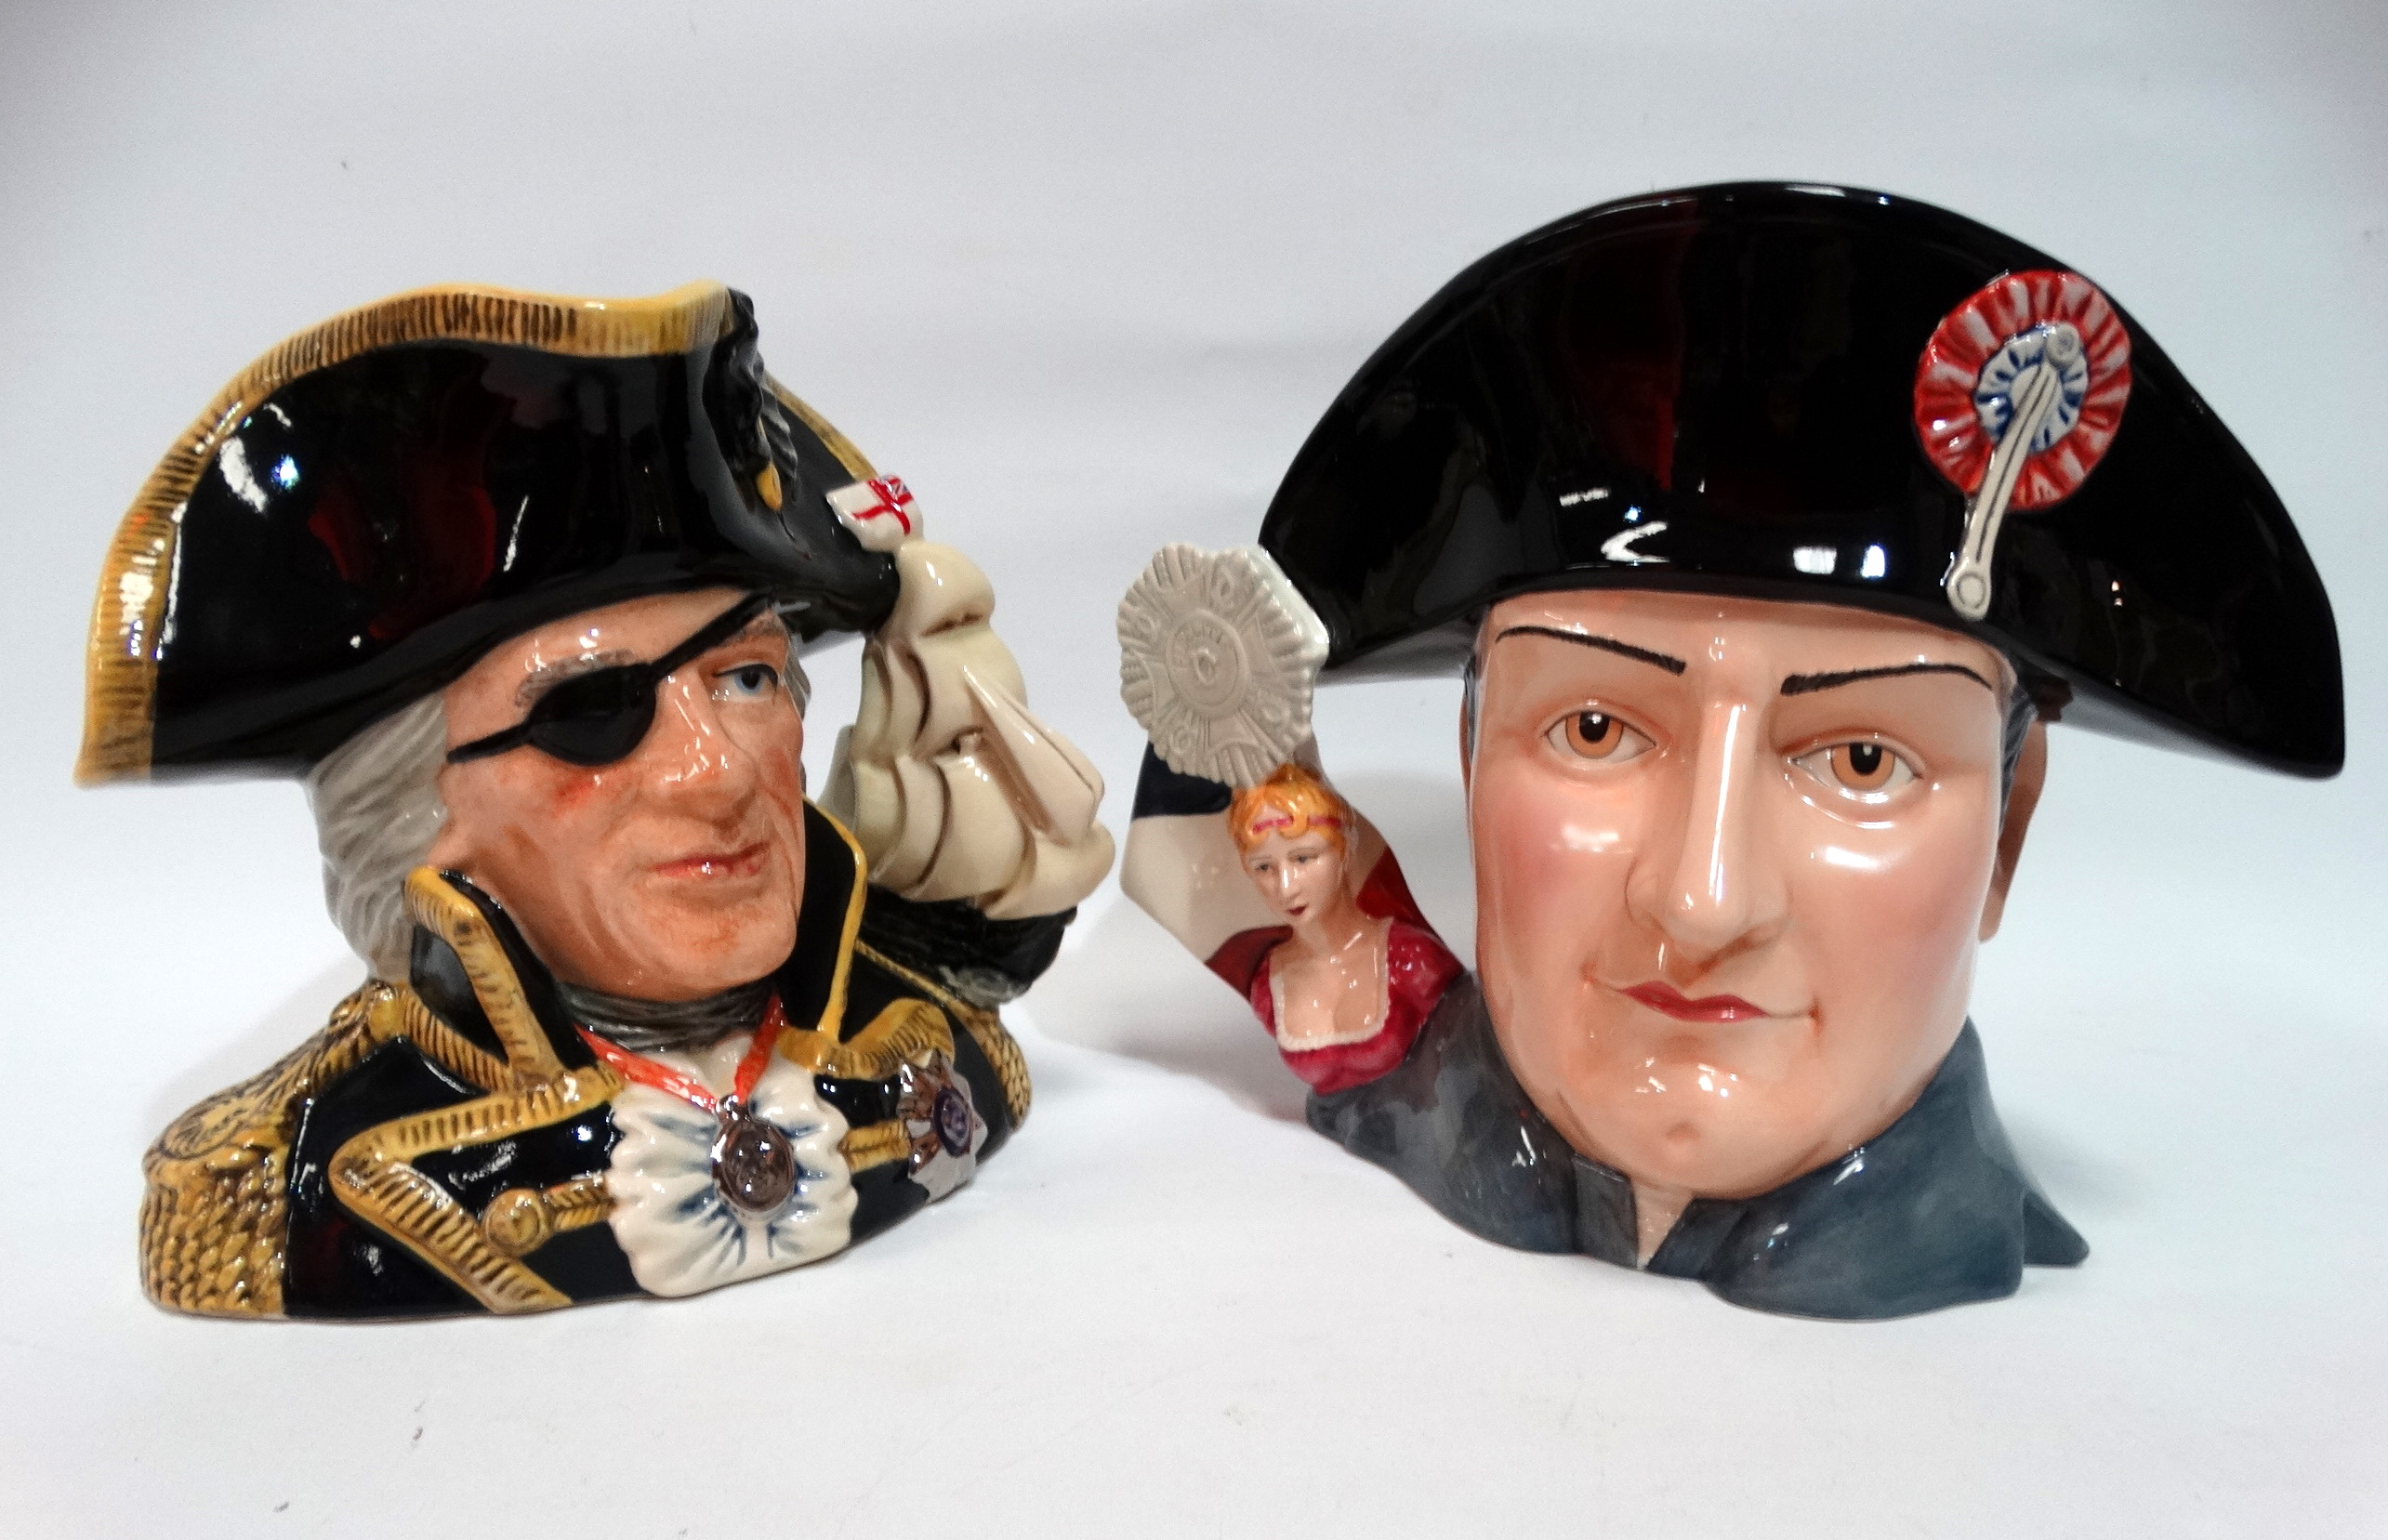 A large Royal Doulton character jug - Vice Admiral Lord Nelson, height 18cm, together with